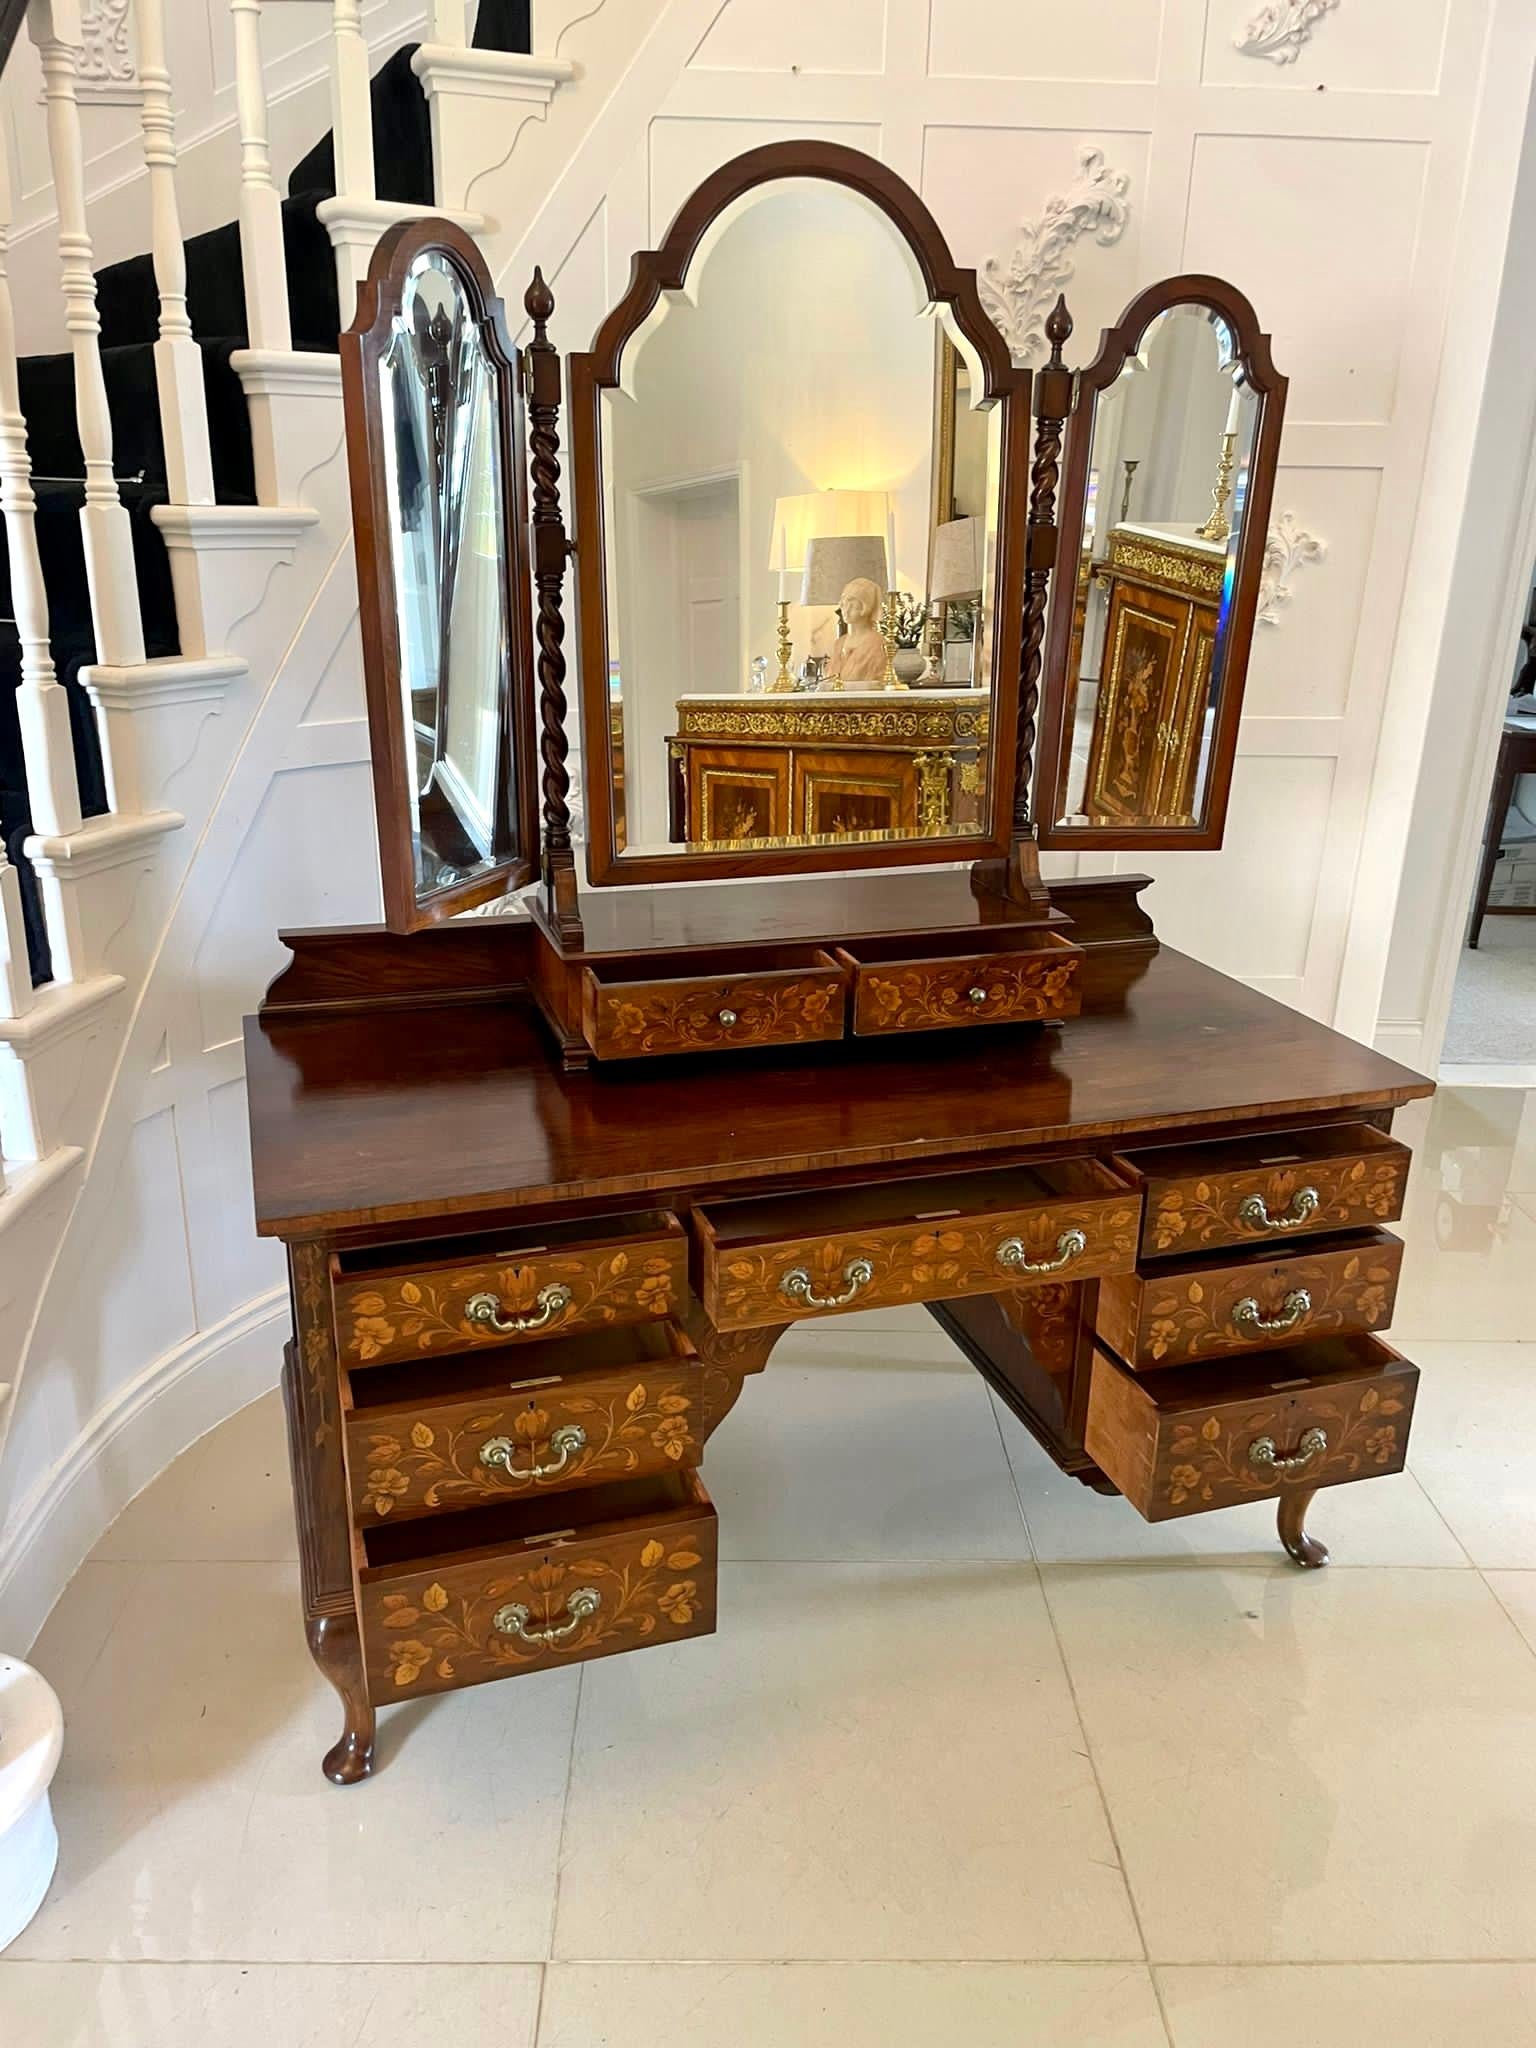 Outstanding quality antique Victorian figured walnut floral marquetry inlaid dressing table 
having a shaped adjustable bevelled edge triple dressing mirror with solid walnut barley twist supports and two floral marquetry inlaid drawers with